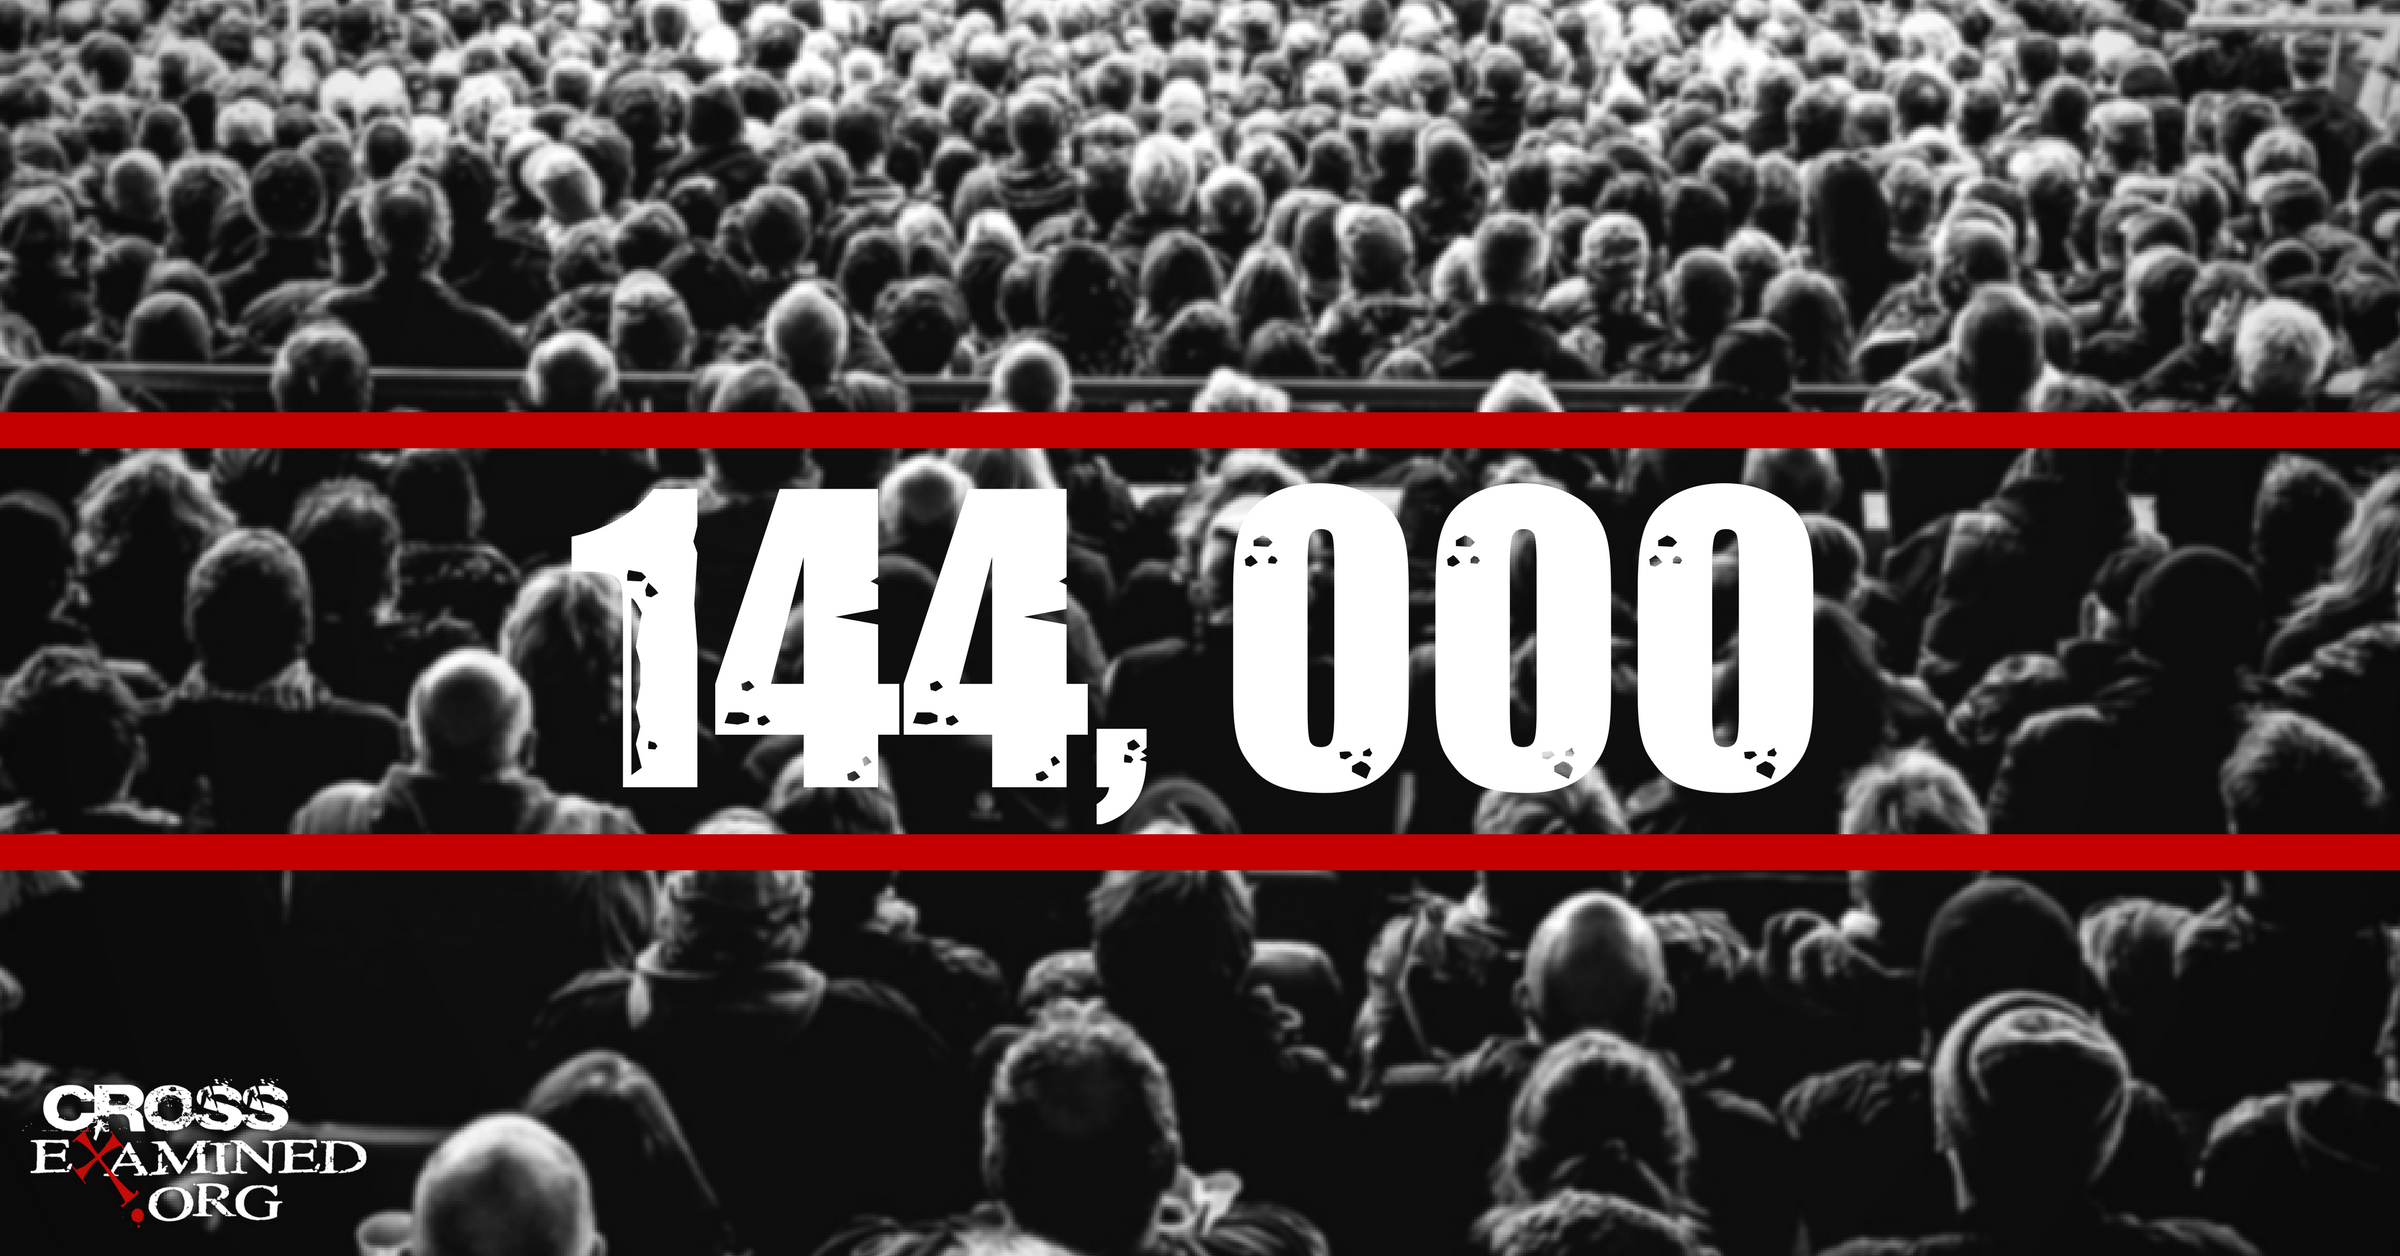 Will There Only Be 144,000 People in Heaven?